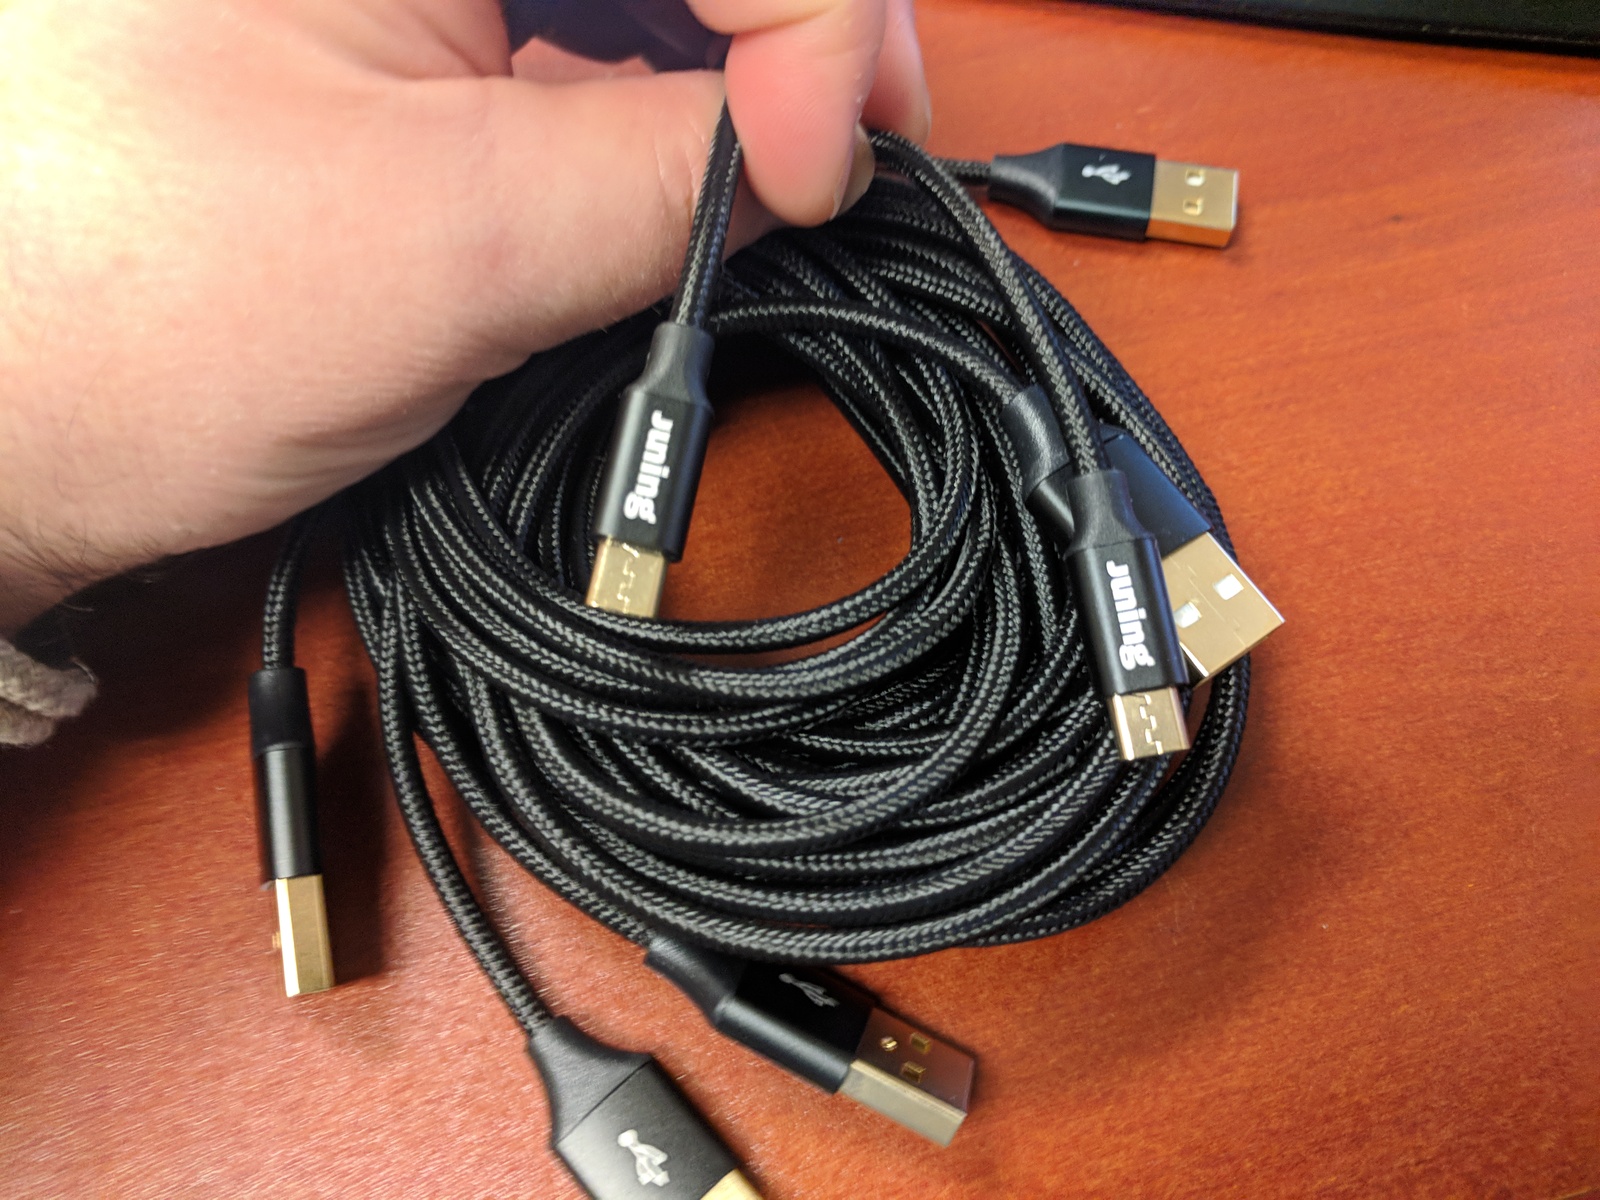 Awesome set of charging cables, great length!